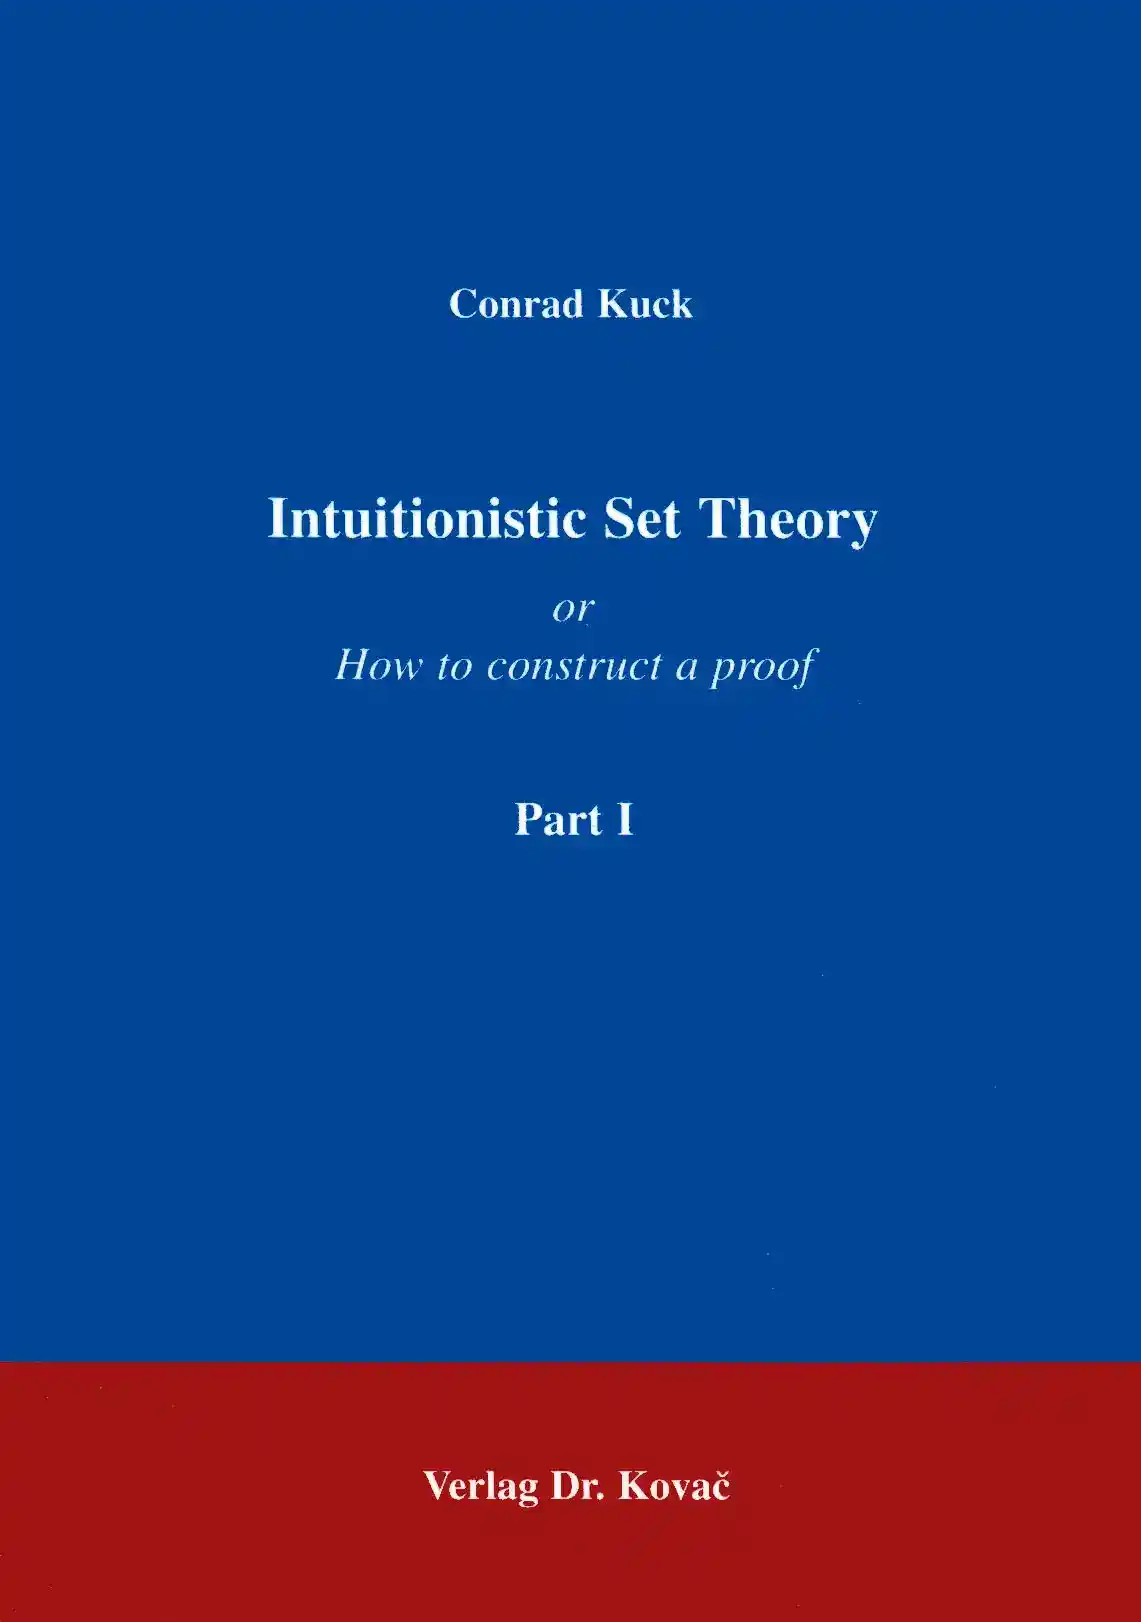 : Intuitionistic Set Theory Part I